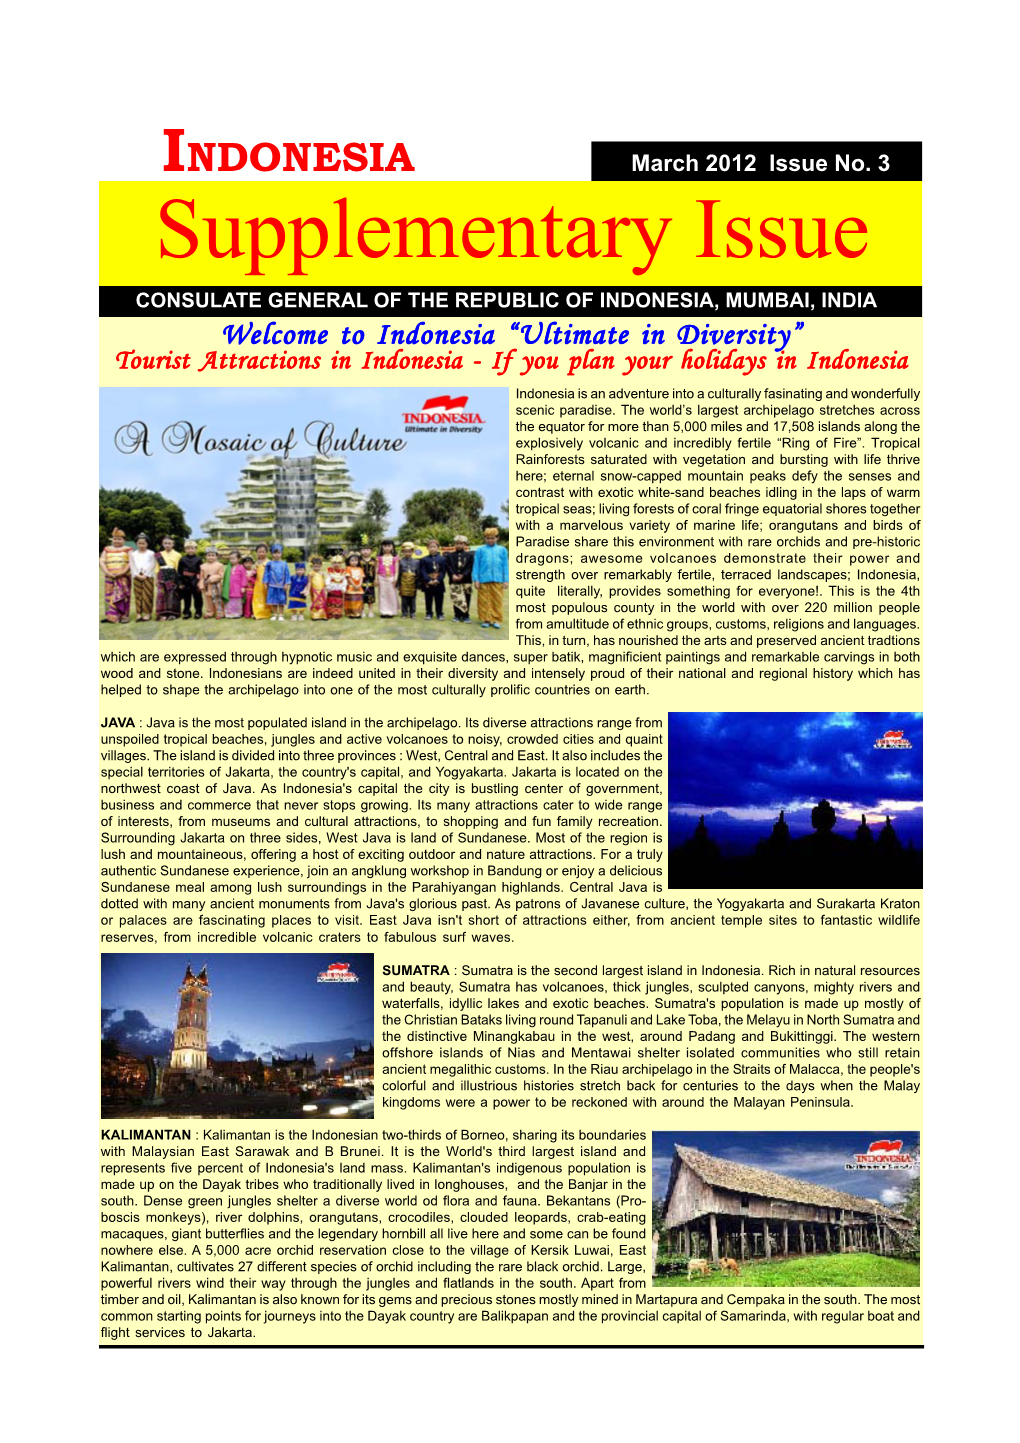 Supplementary Issue